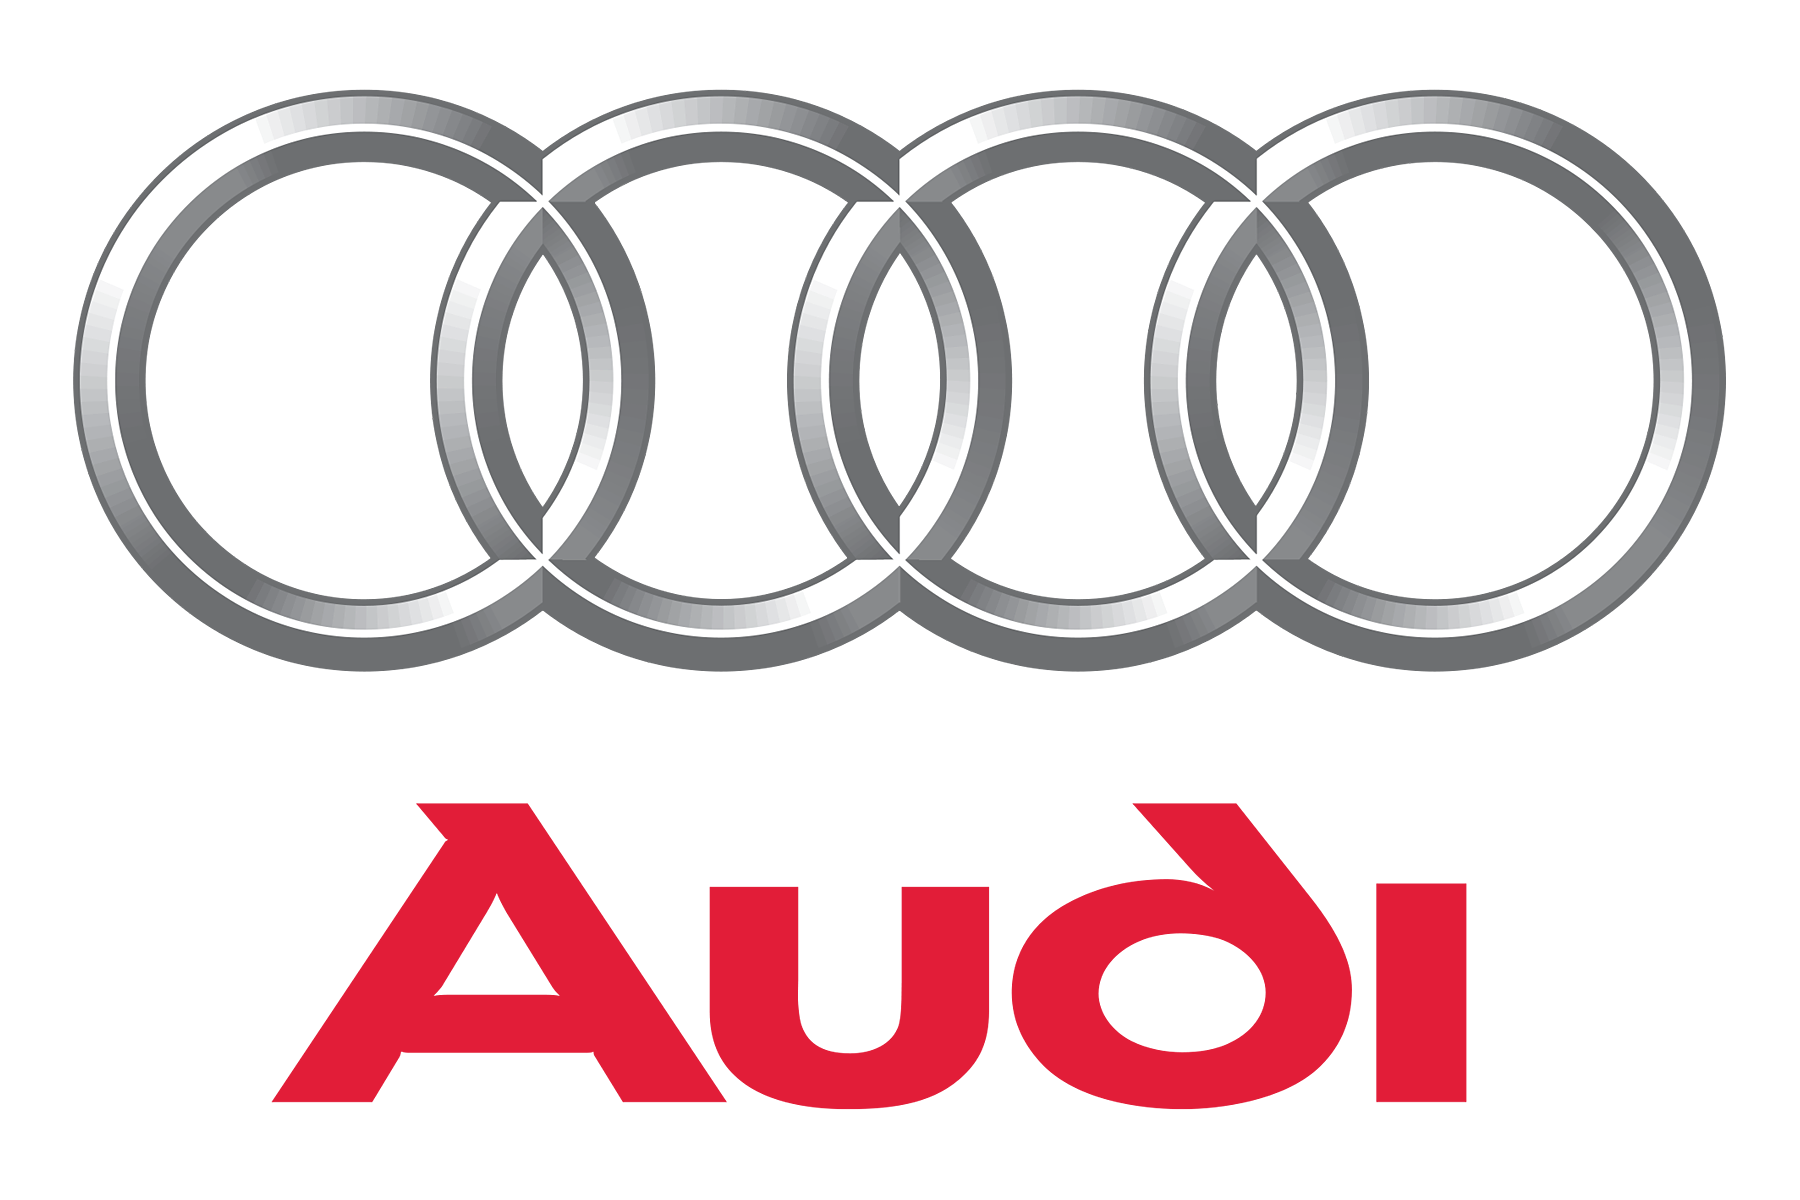 How to draw The Audi logo  2nd version by ThomasOnTube on DeviantArt